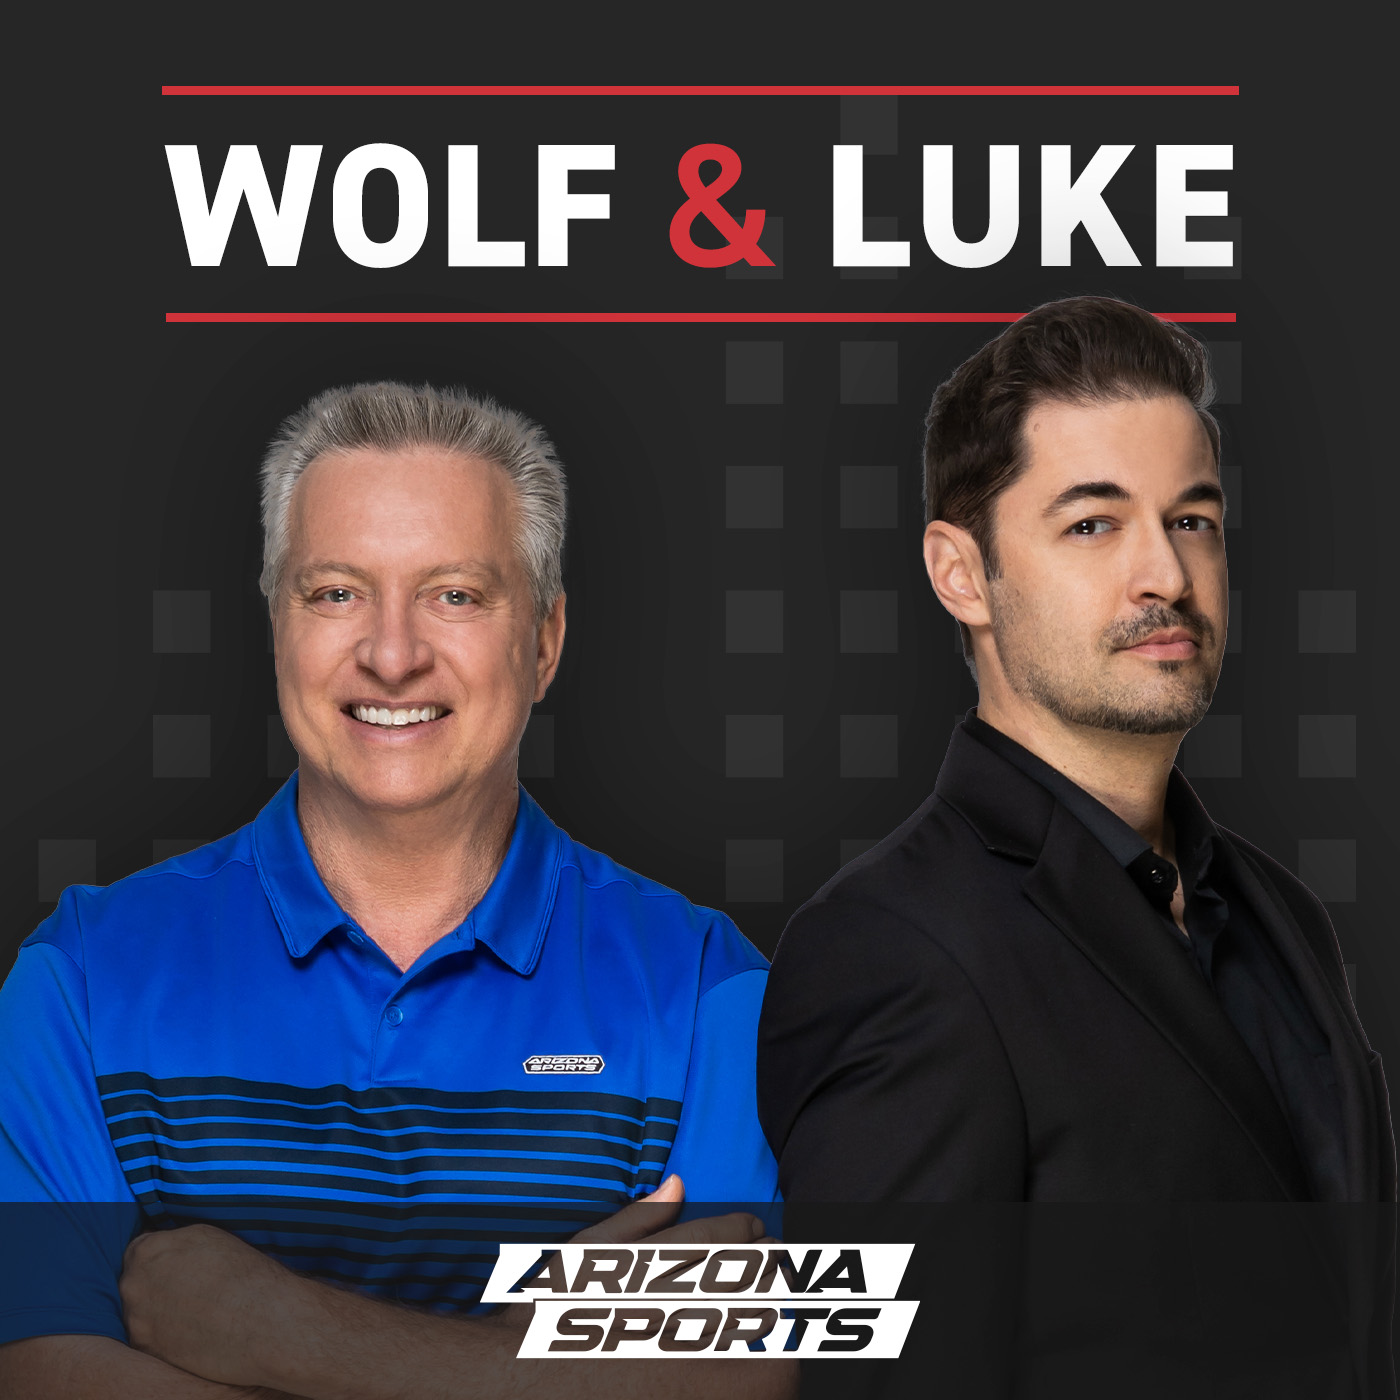 Luke rants about voters denying the Arizona Coyotes a new arena in Tempe